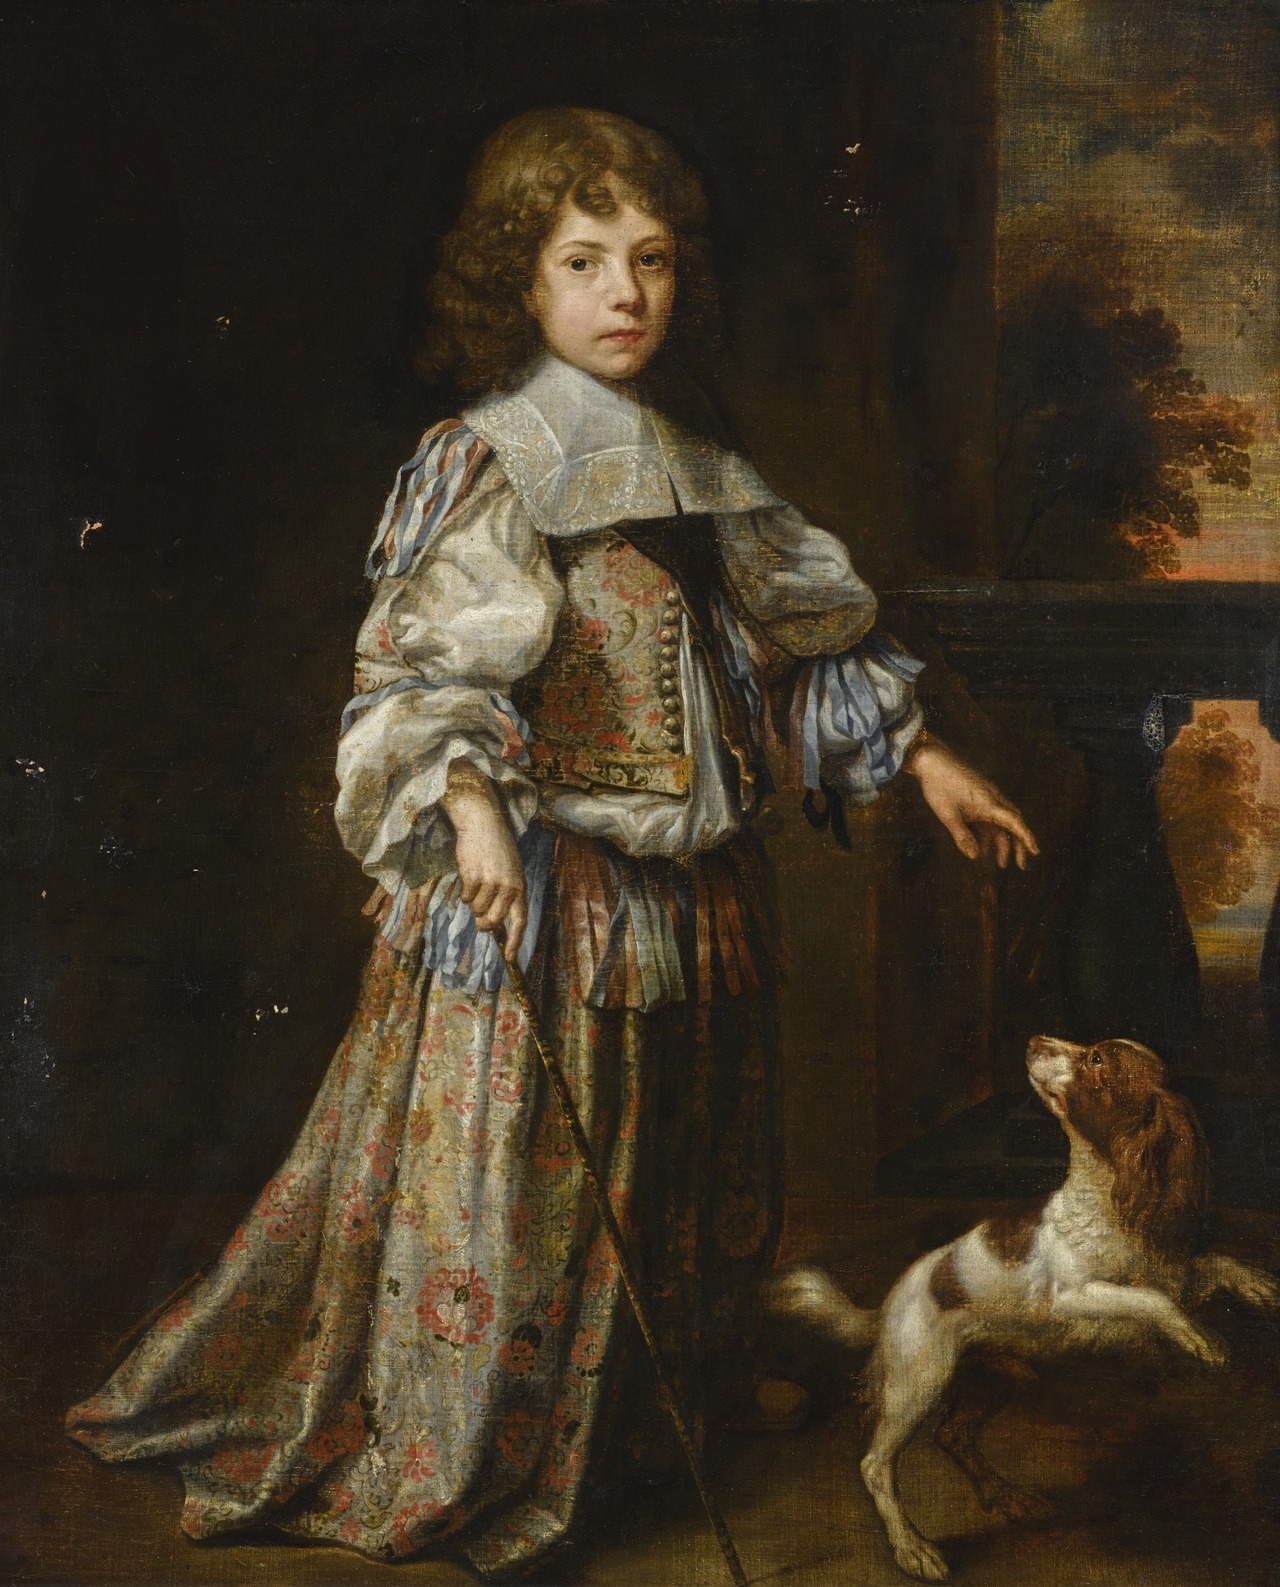 Dutch School, â€˜Portrait of a boy, in a richly embroidered doublet and skirtâ€™, c.1665, oil on canvas, Dutch, for sale est. 25,000-35,000 GBP in Sothebyâ€™s Old Masters day sale, July 2019